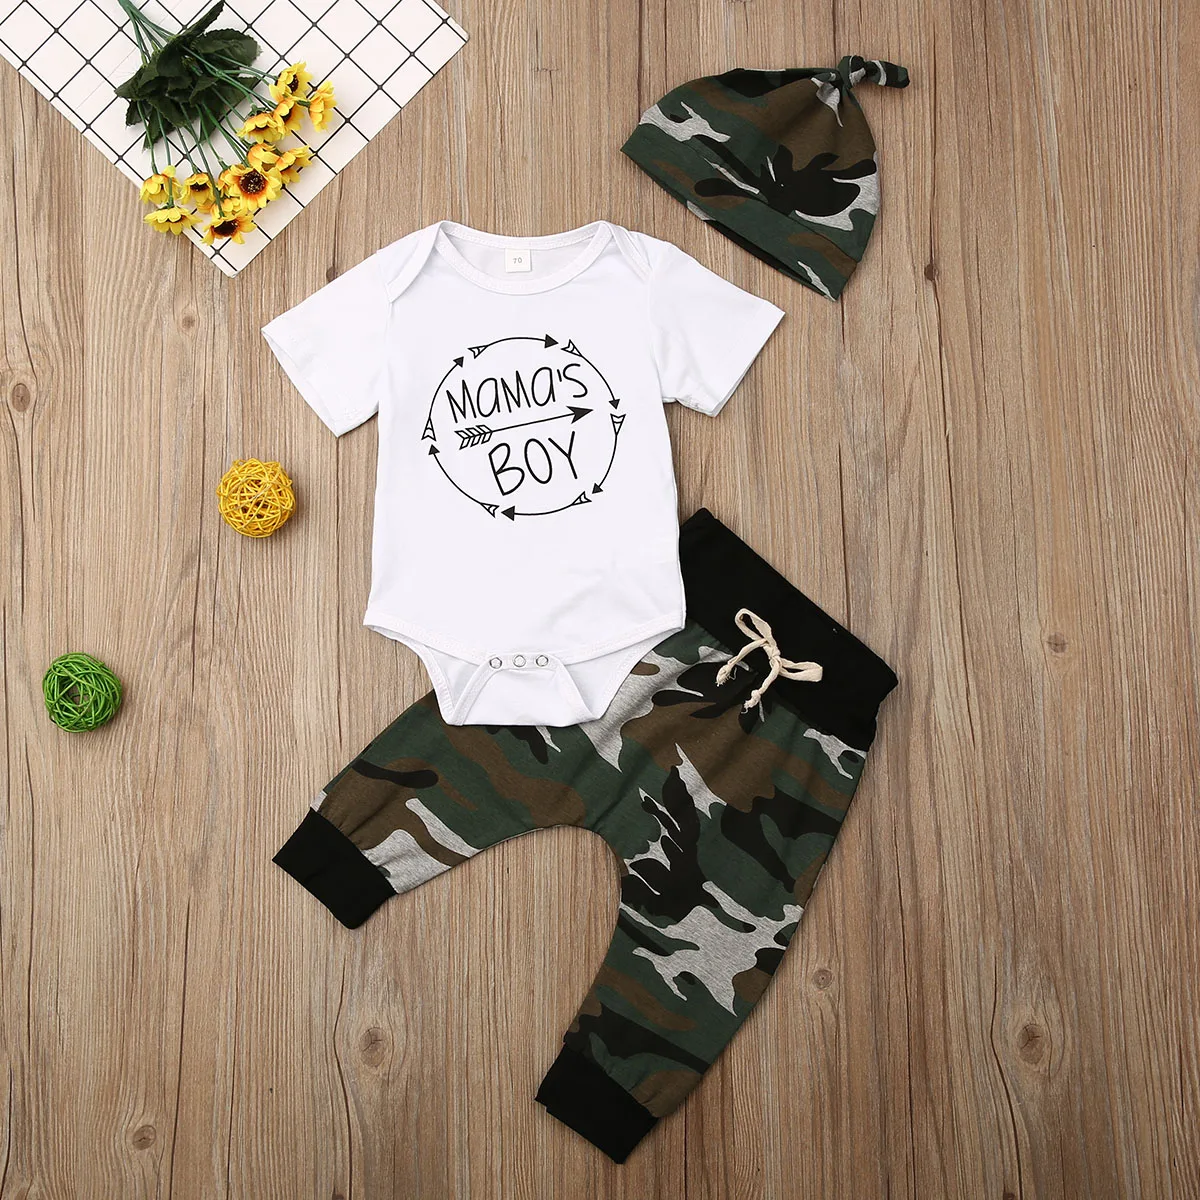 

Pudcoco Newborn Baby Boy Girl Clothes Short Sleeve Letter Print Romper Tops Camouflage Print Long Pants Headband 3Pcs Outfits